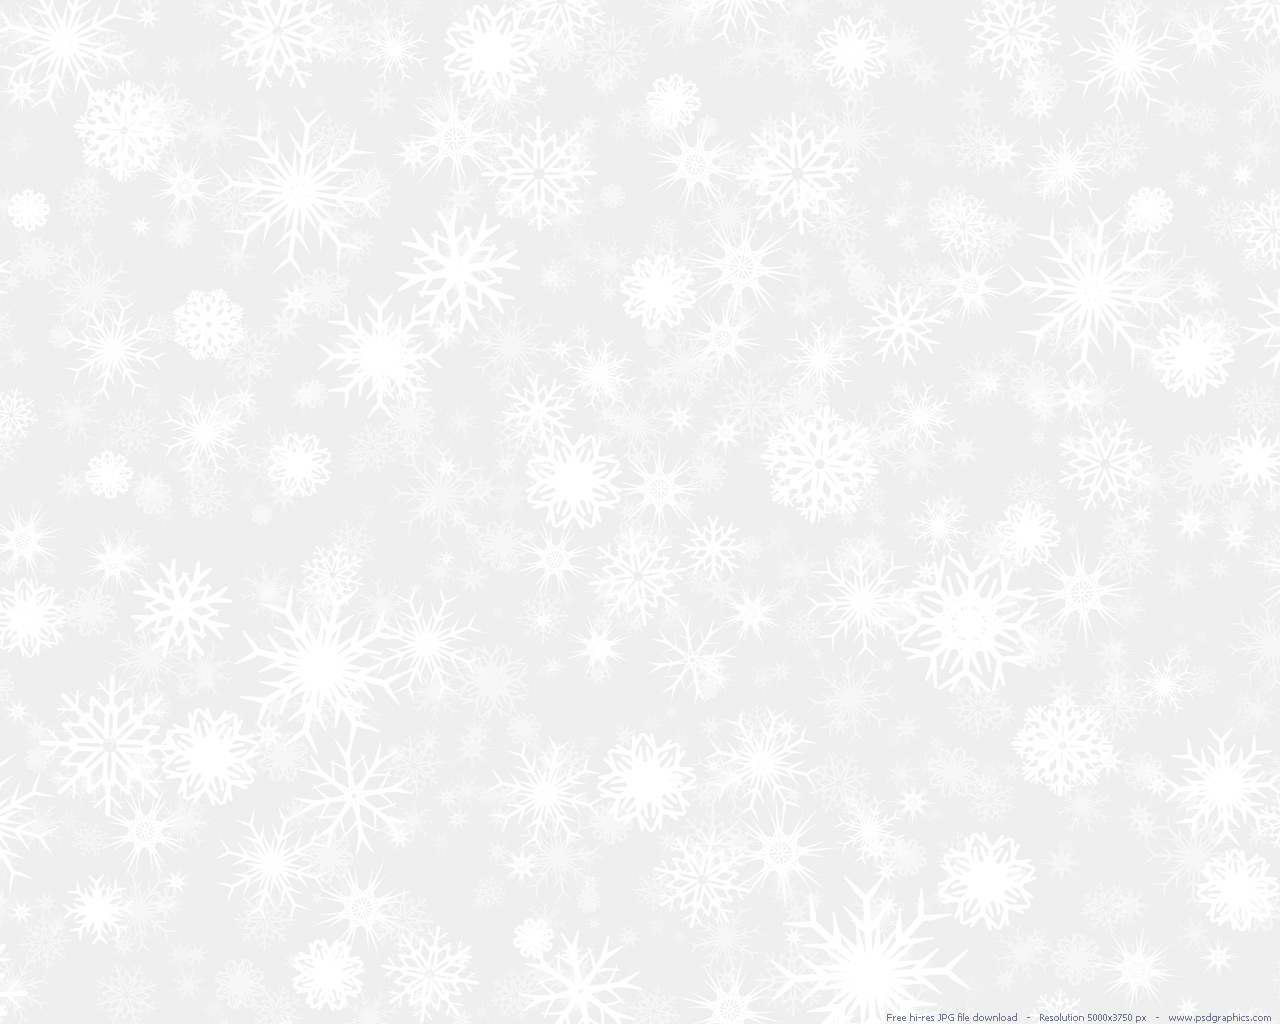 Large preview 1280x1024px White snow 1280x1024